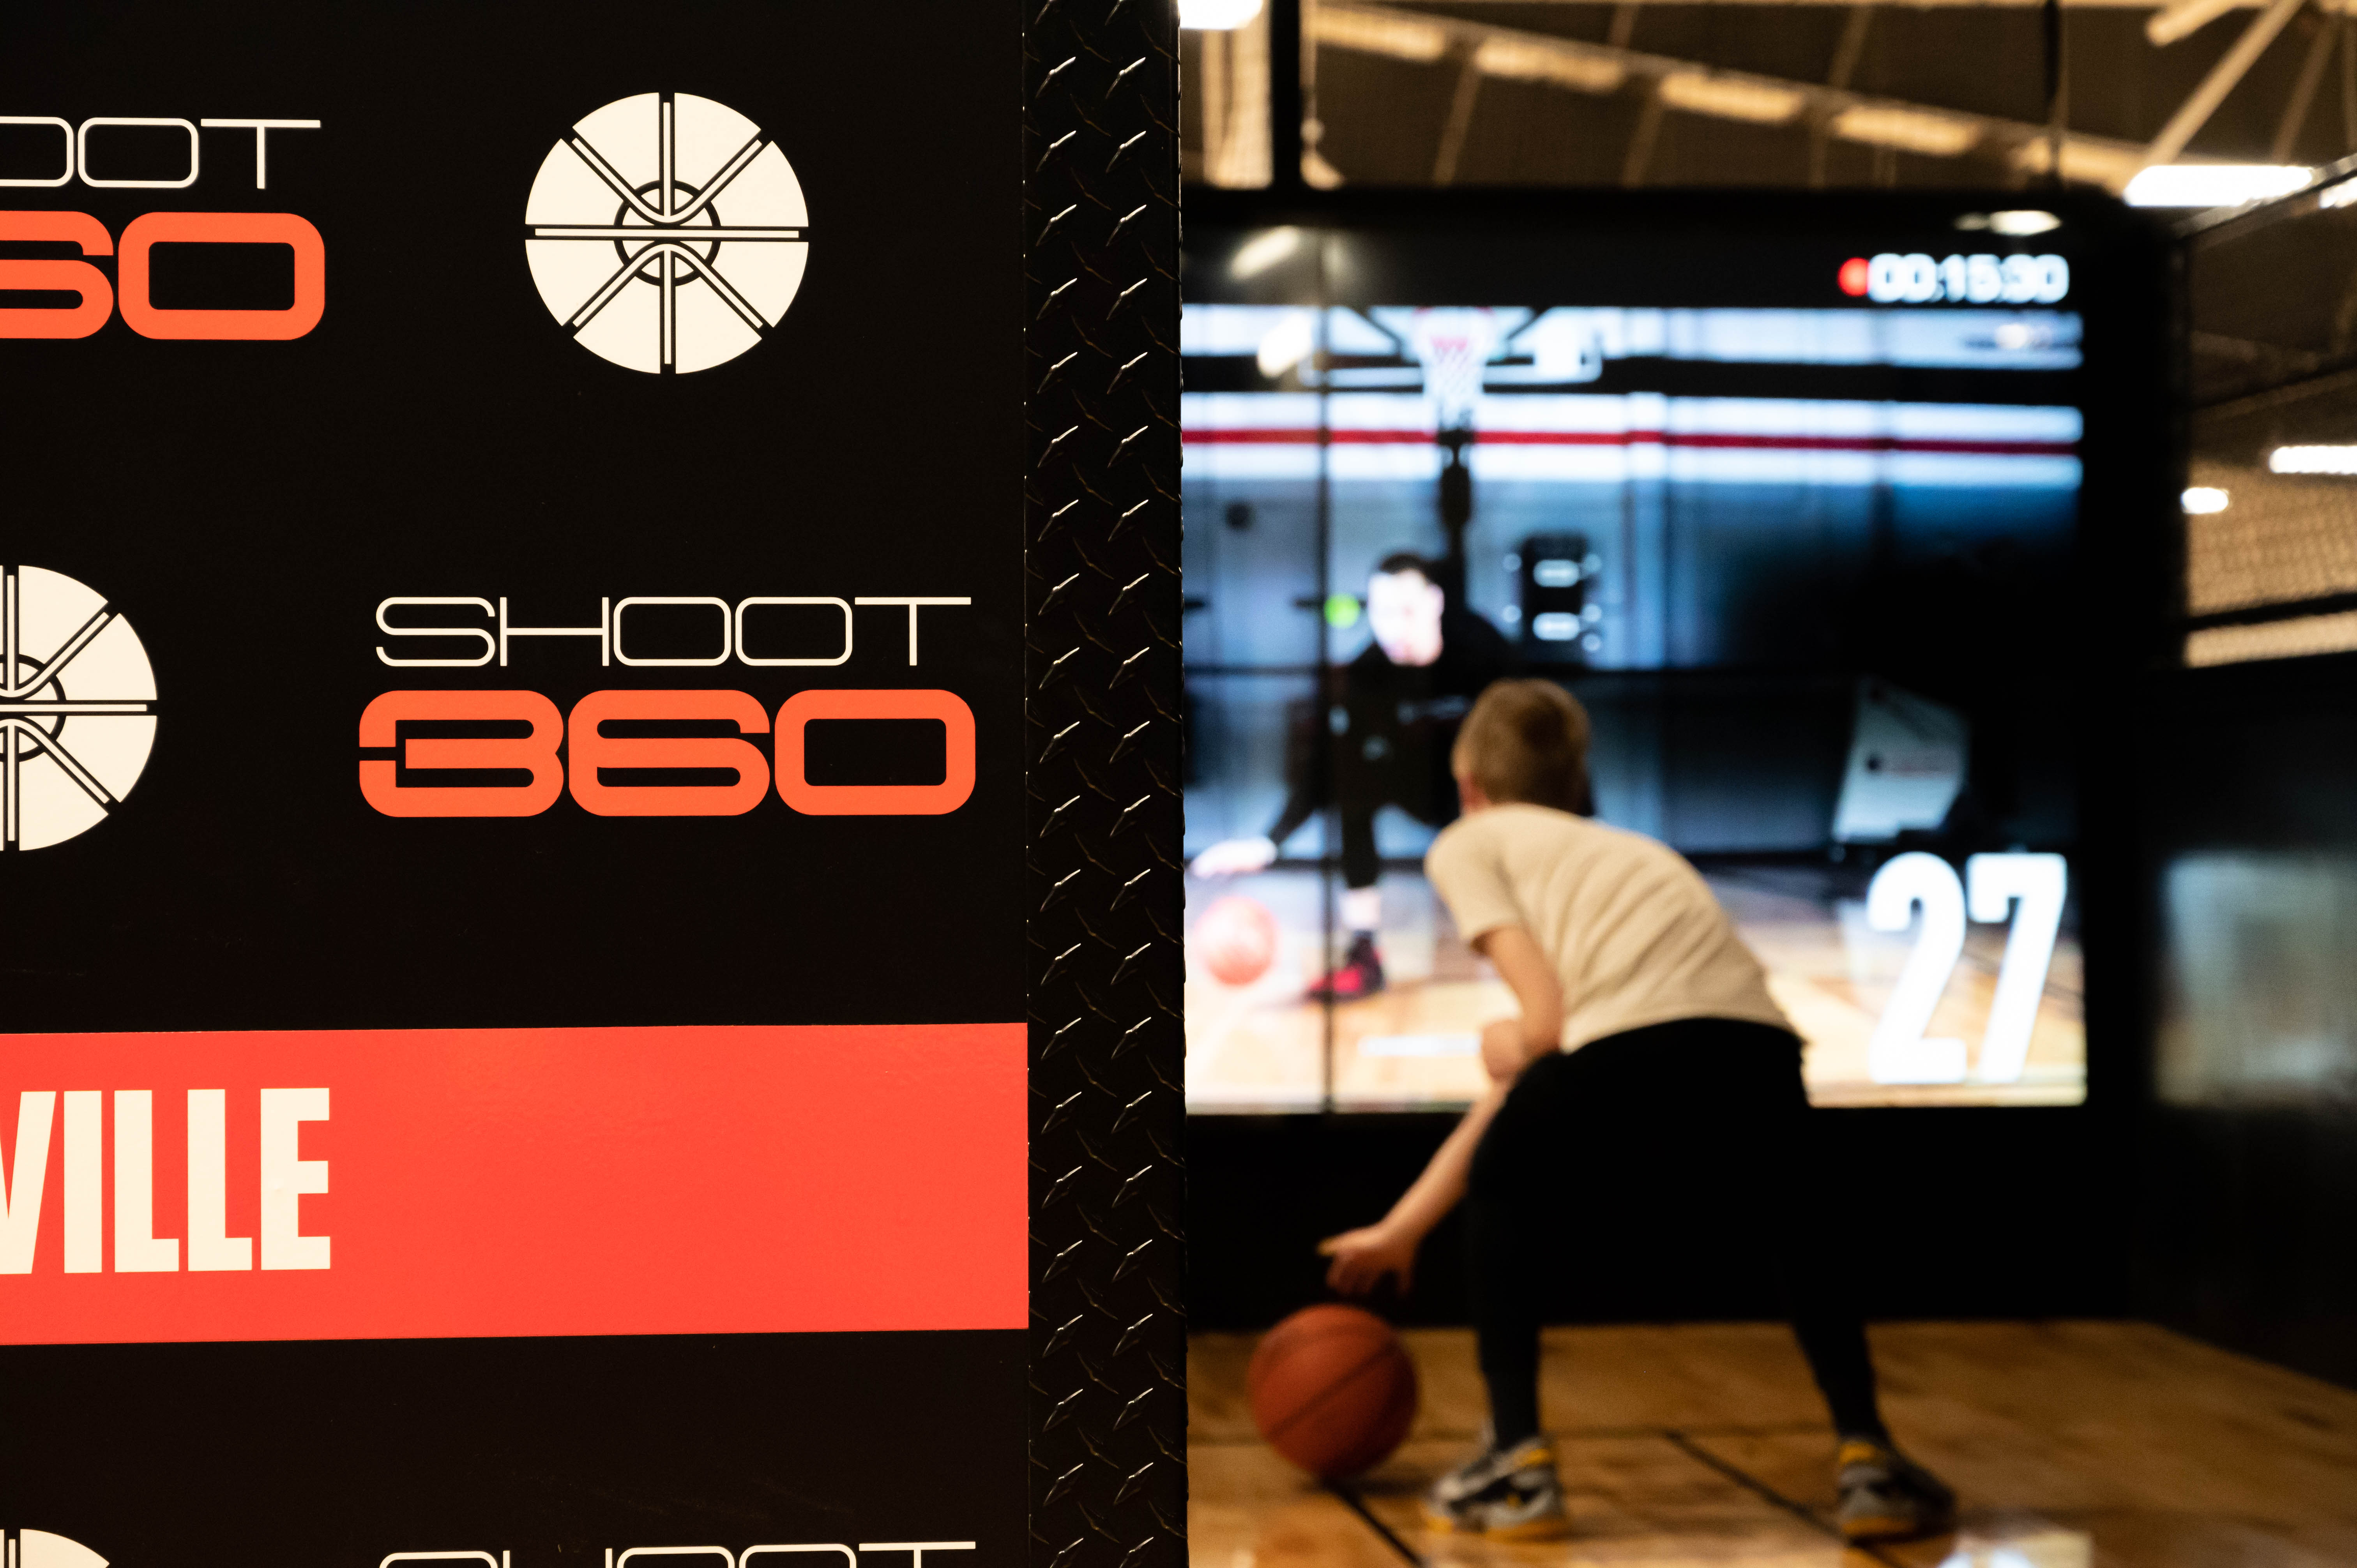 Former Indiana Pacer and 2004 NBA Slam Dunk Contest Winner, Fred Jones and Wework Co-Founder, Miguel McKelvey Announce Shoot 360 Naperville Opening